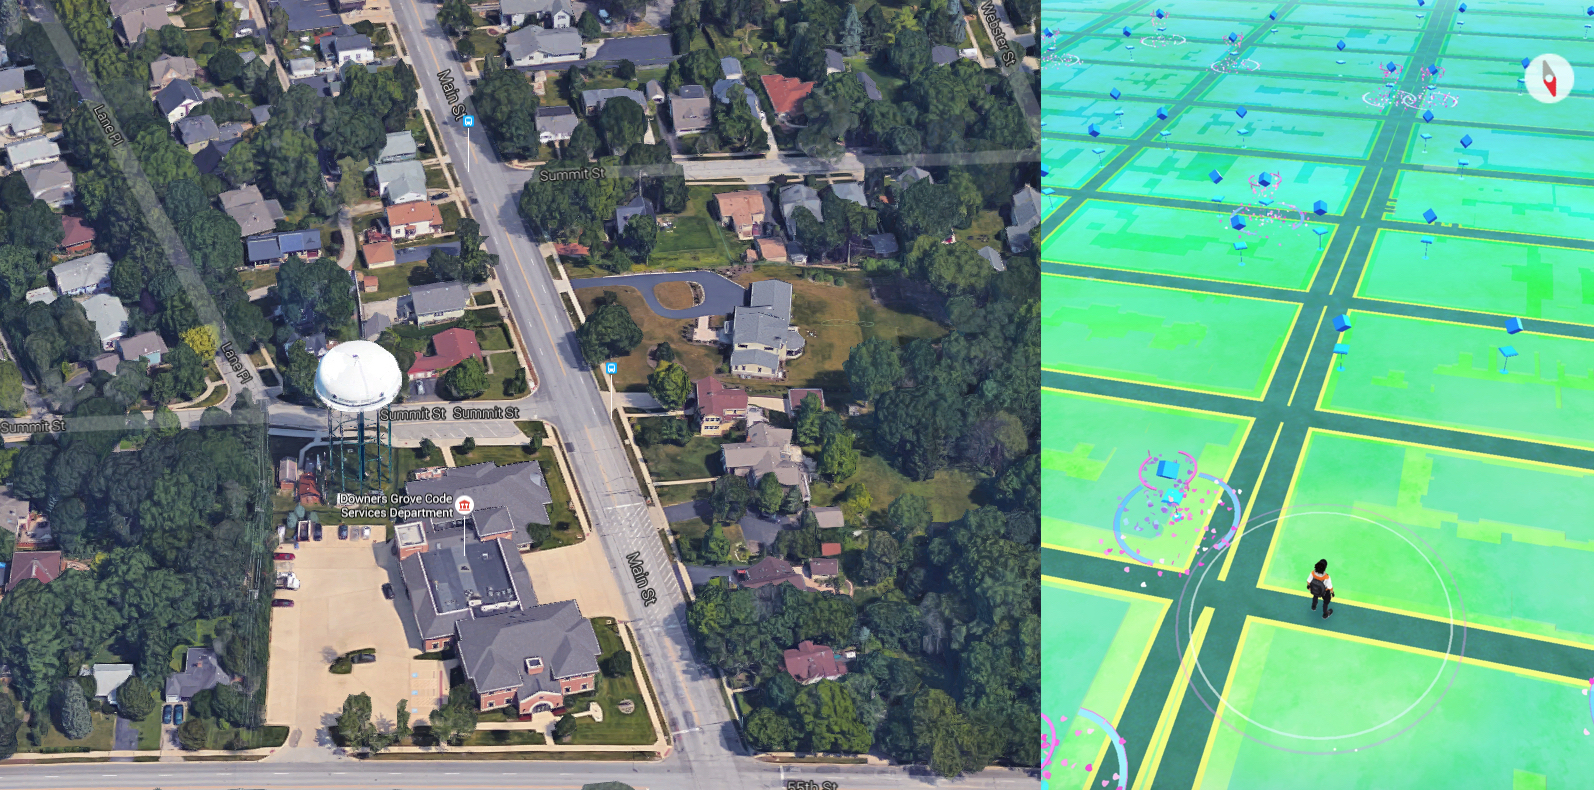 Comparison of Downers Grove in Google Maps to a separate Pokémon Go location